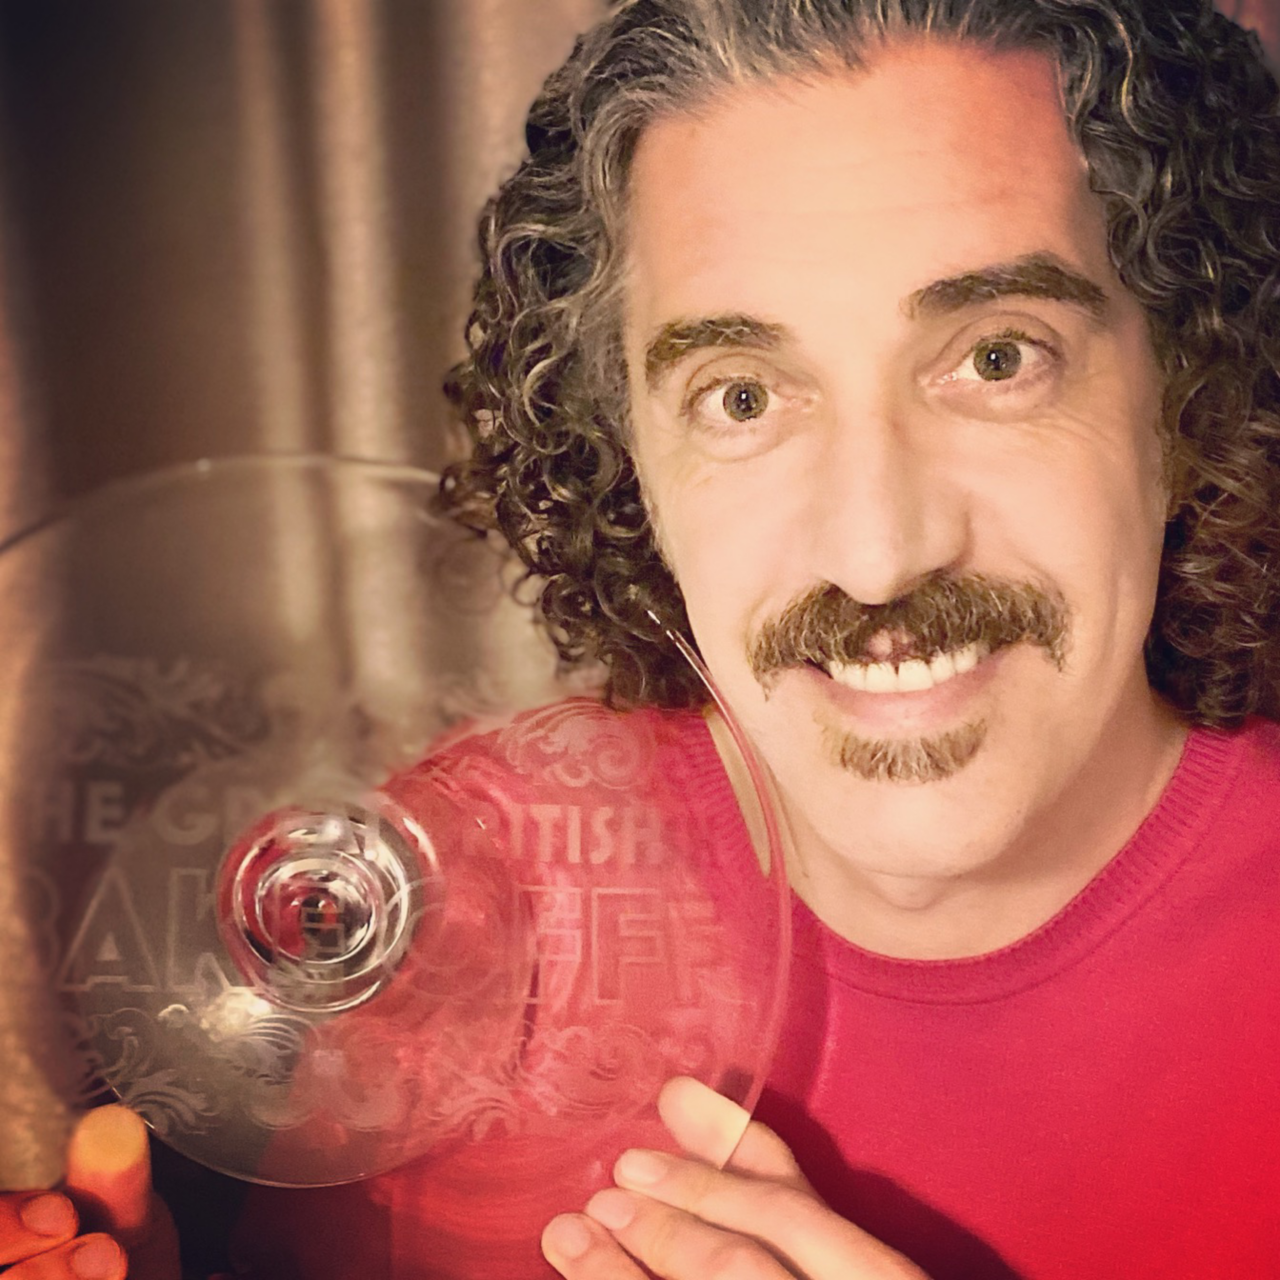 Giuseppe Dell'Anno with his British Baking Show trophy